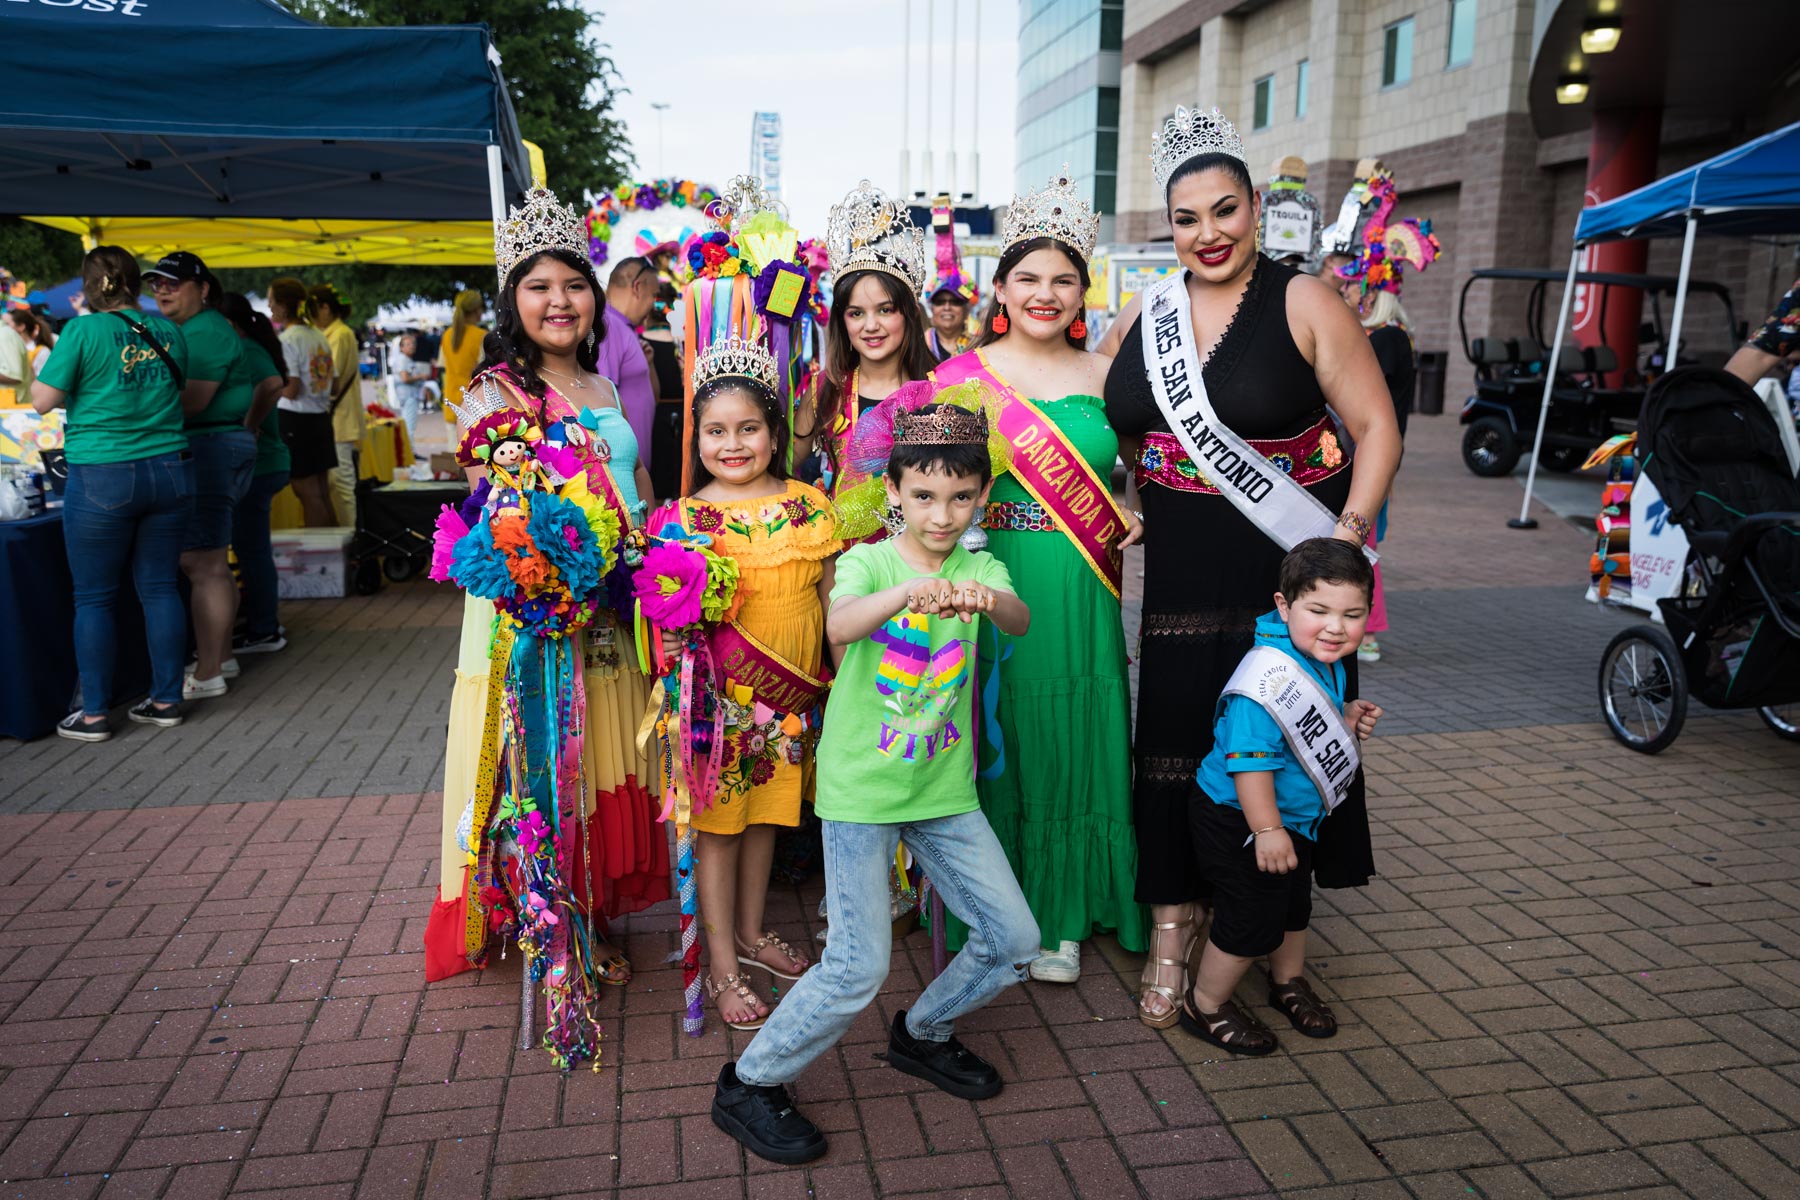 Royal court posed together wearing colorful outfits and tiaras for an article on the best Fiesta photos